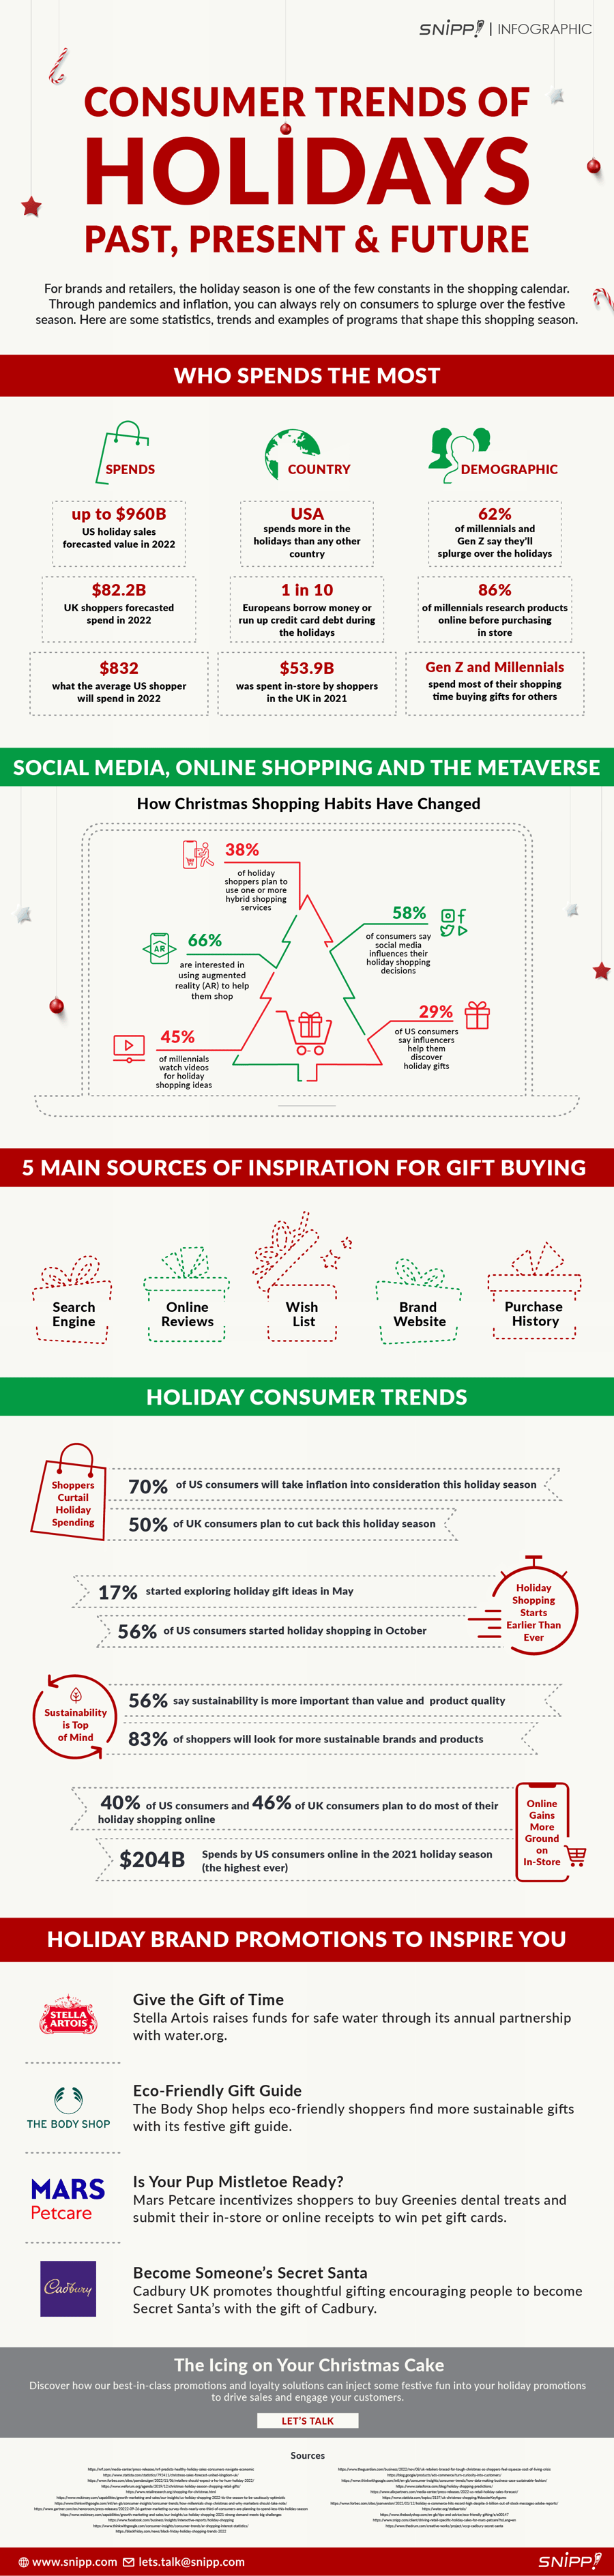 Snipp Holiday Trends Infographic